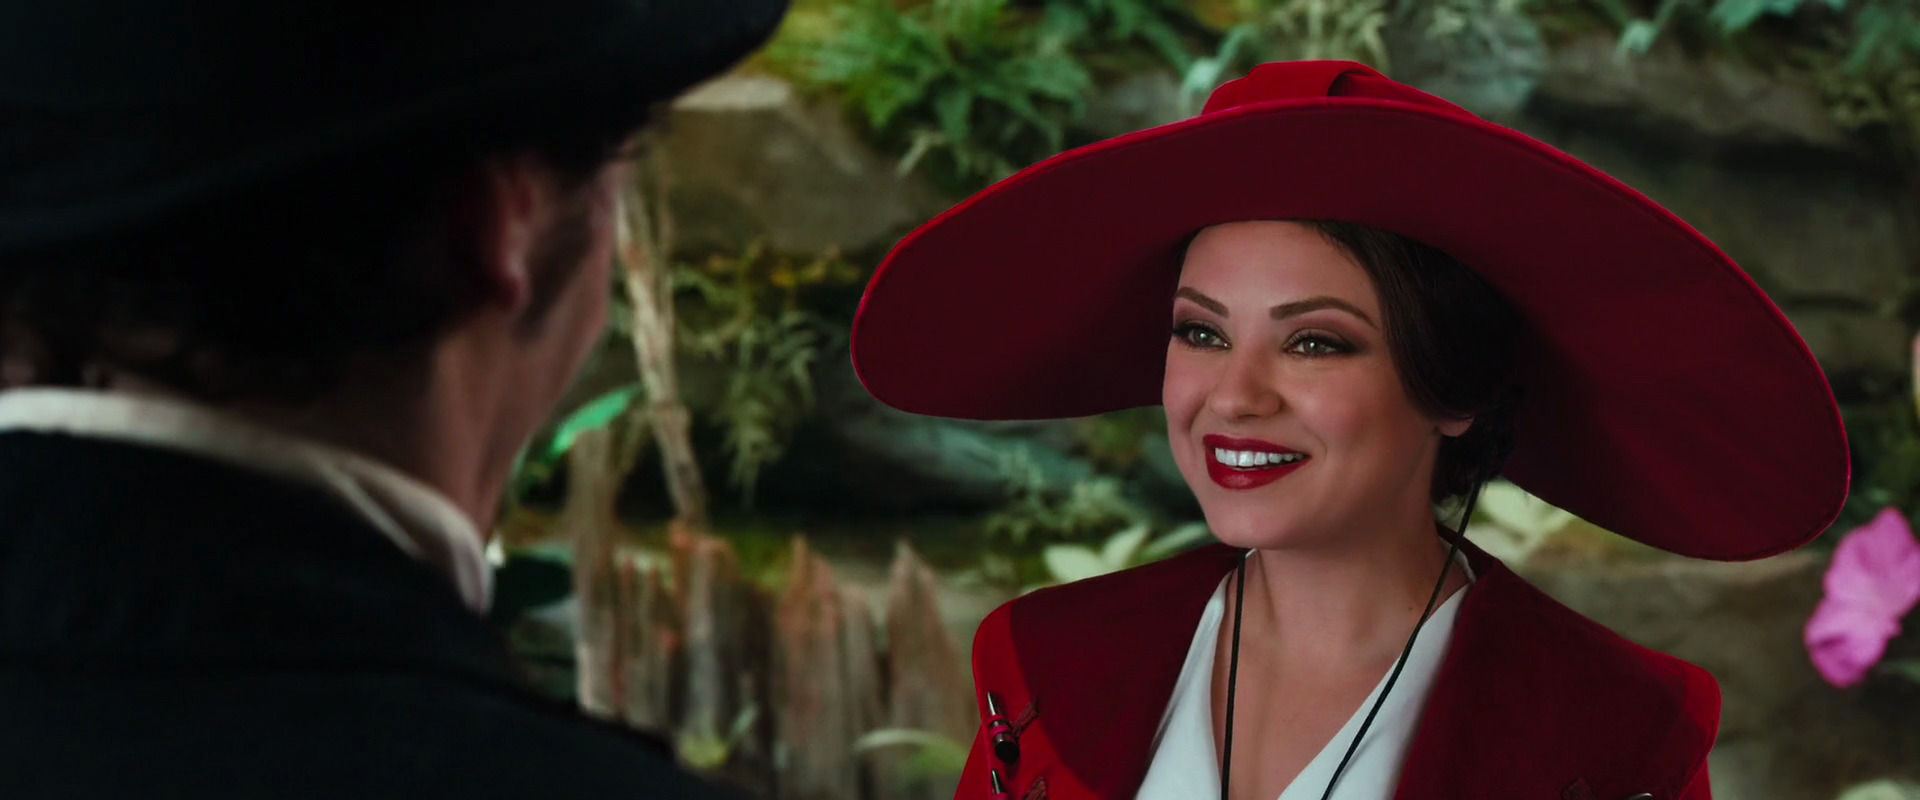 Mila Kunis as Theodora Oz The Great and Powerful picture image